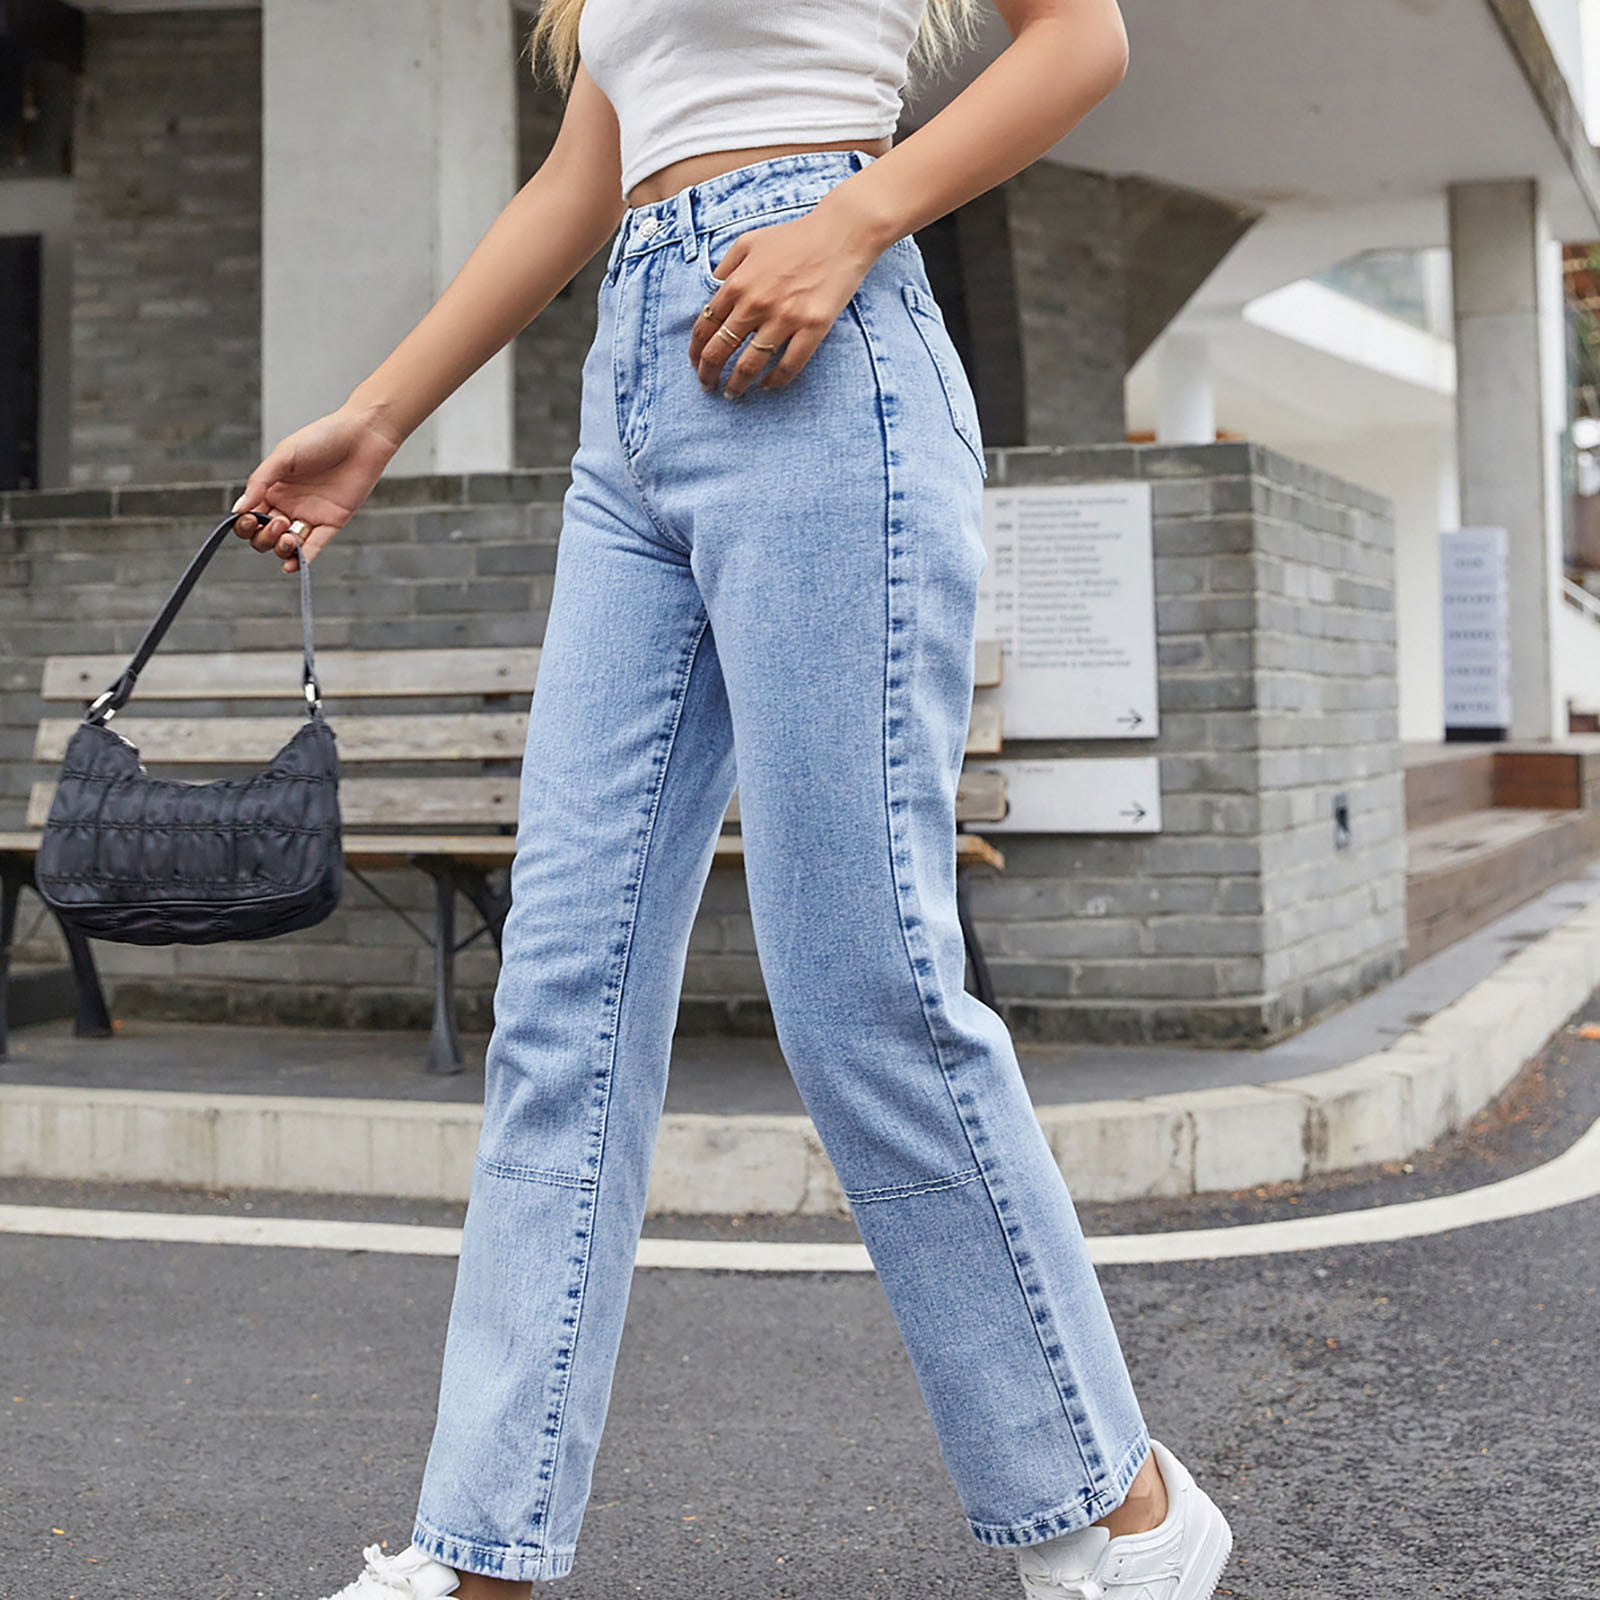 Mrat Casual High Waisted Trousers Full Length Pants Fashion Women Summer  Casual Loose Pocket Solid Button Zipper Trousers Elastic Waist Pants Ladies